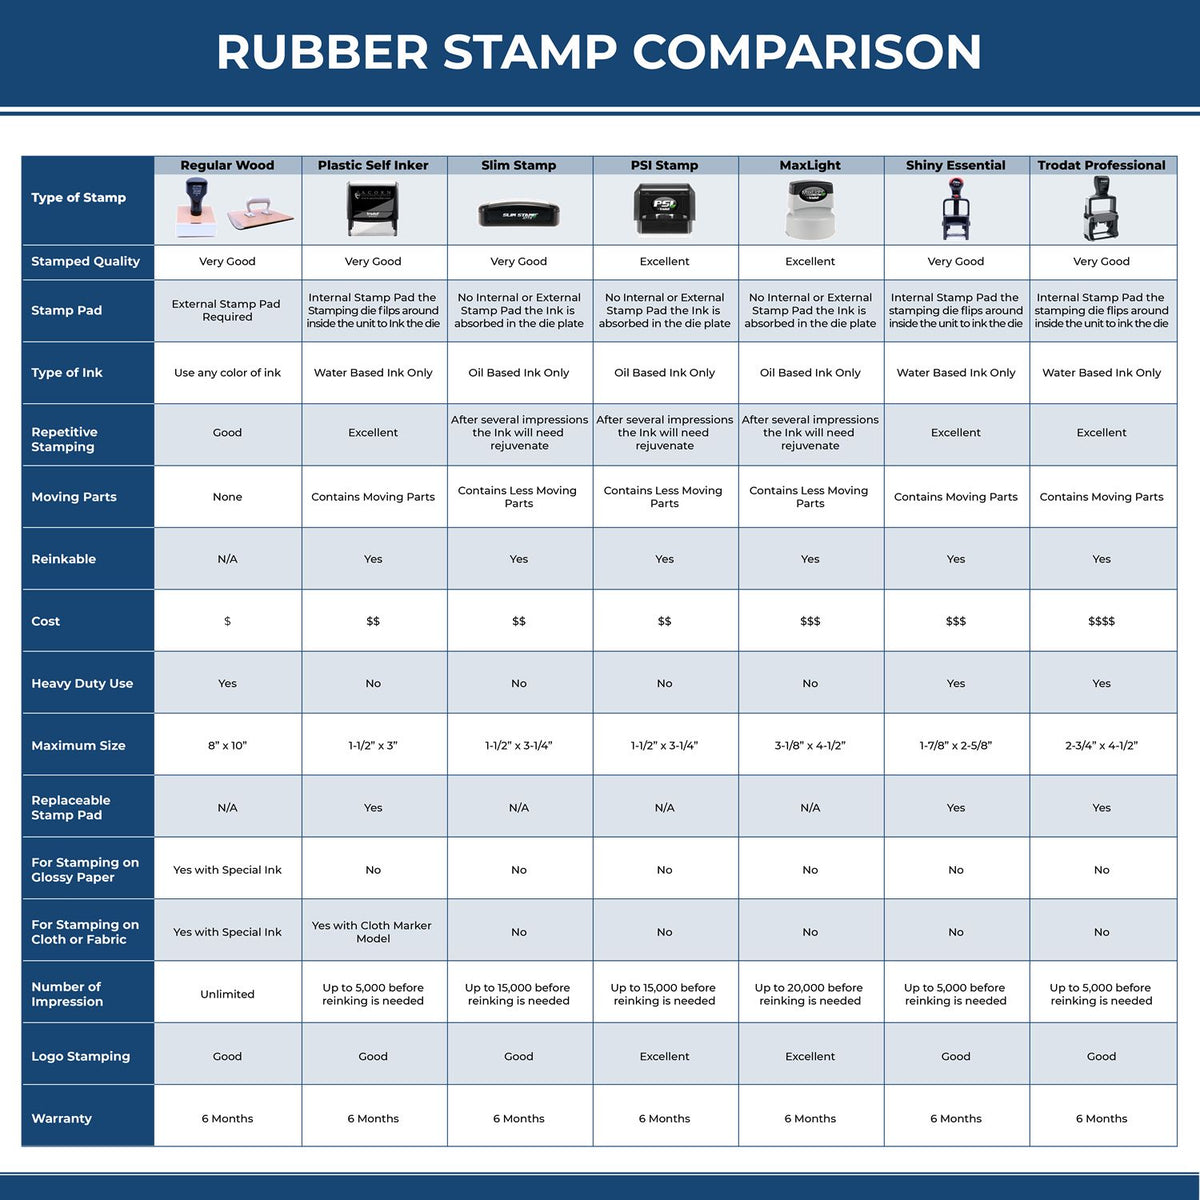 A comparison chart for the different types of mount models available for the Wooden Handle Kansas State Seal Notary Public Stamp.